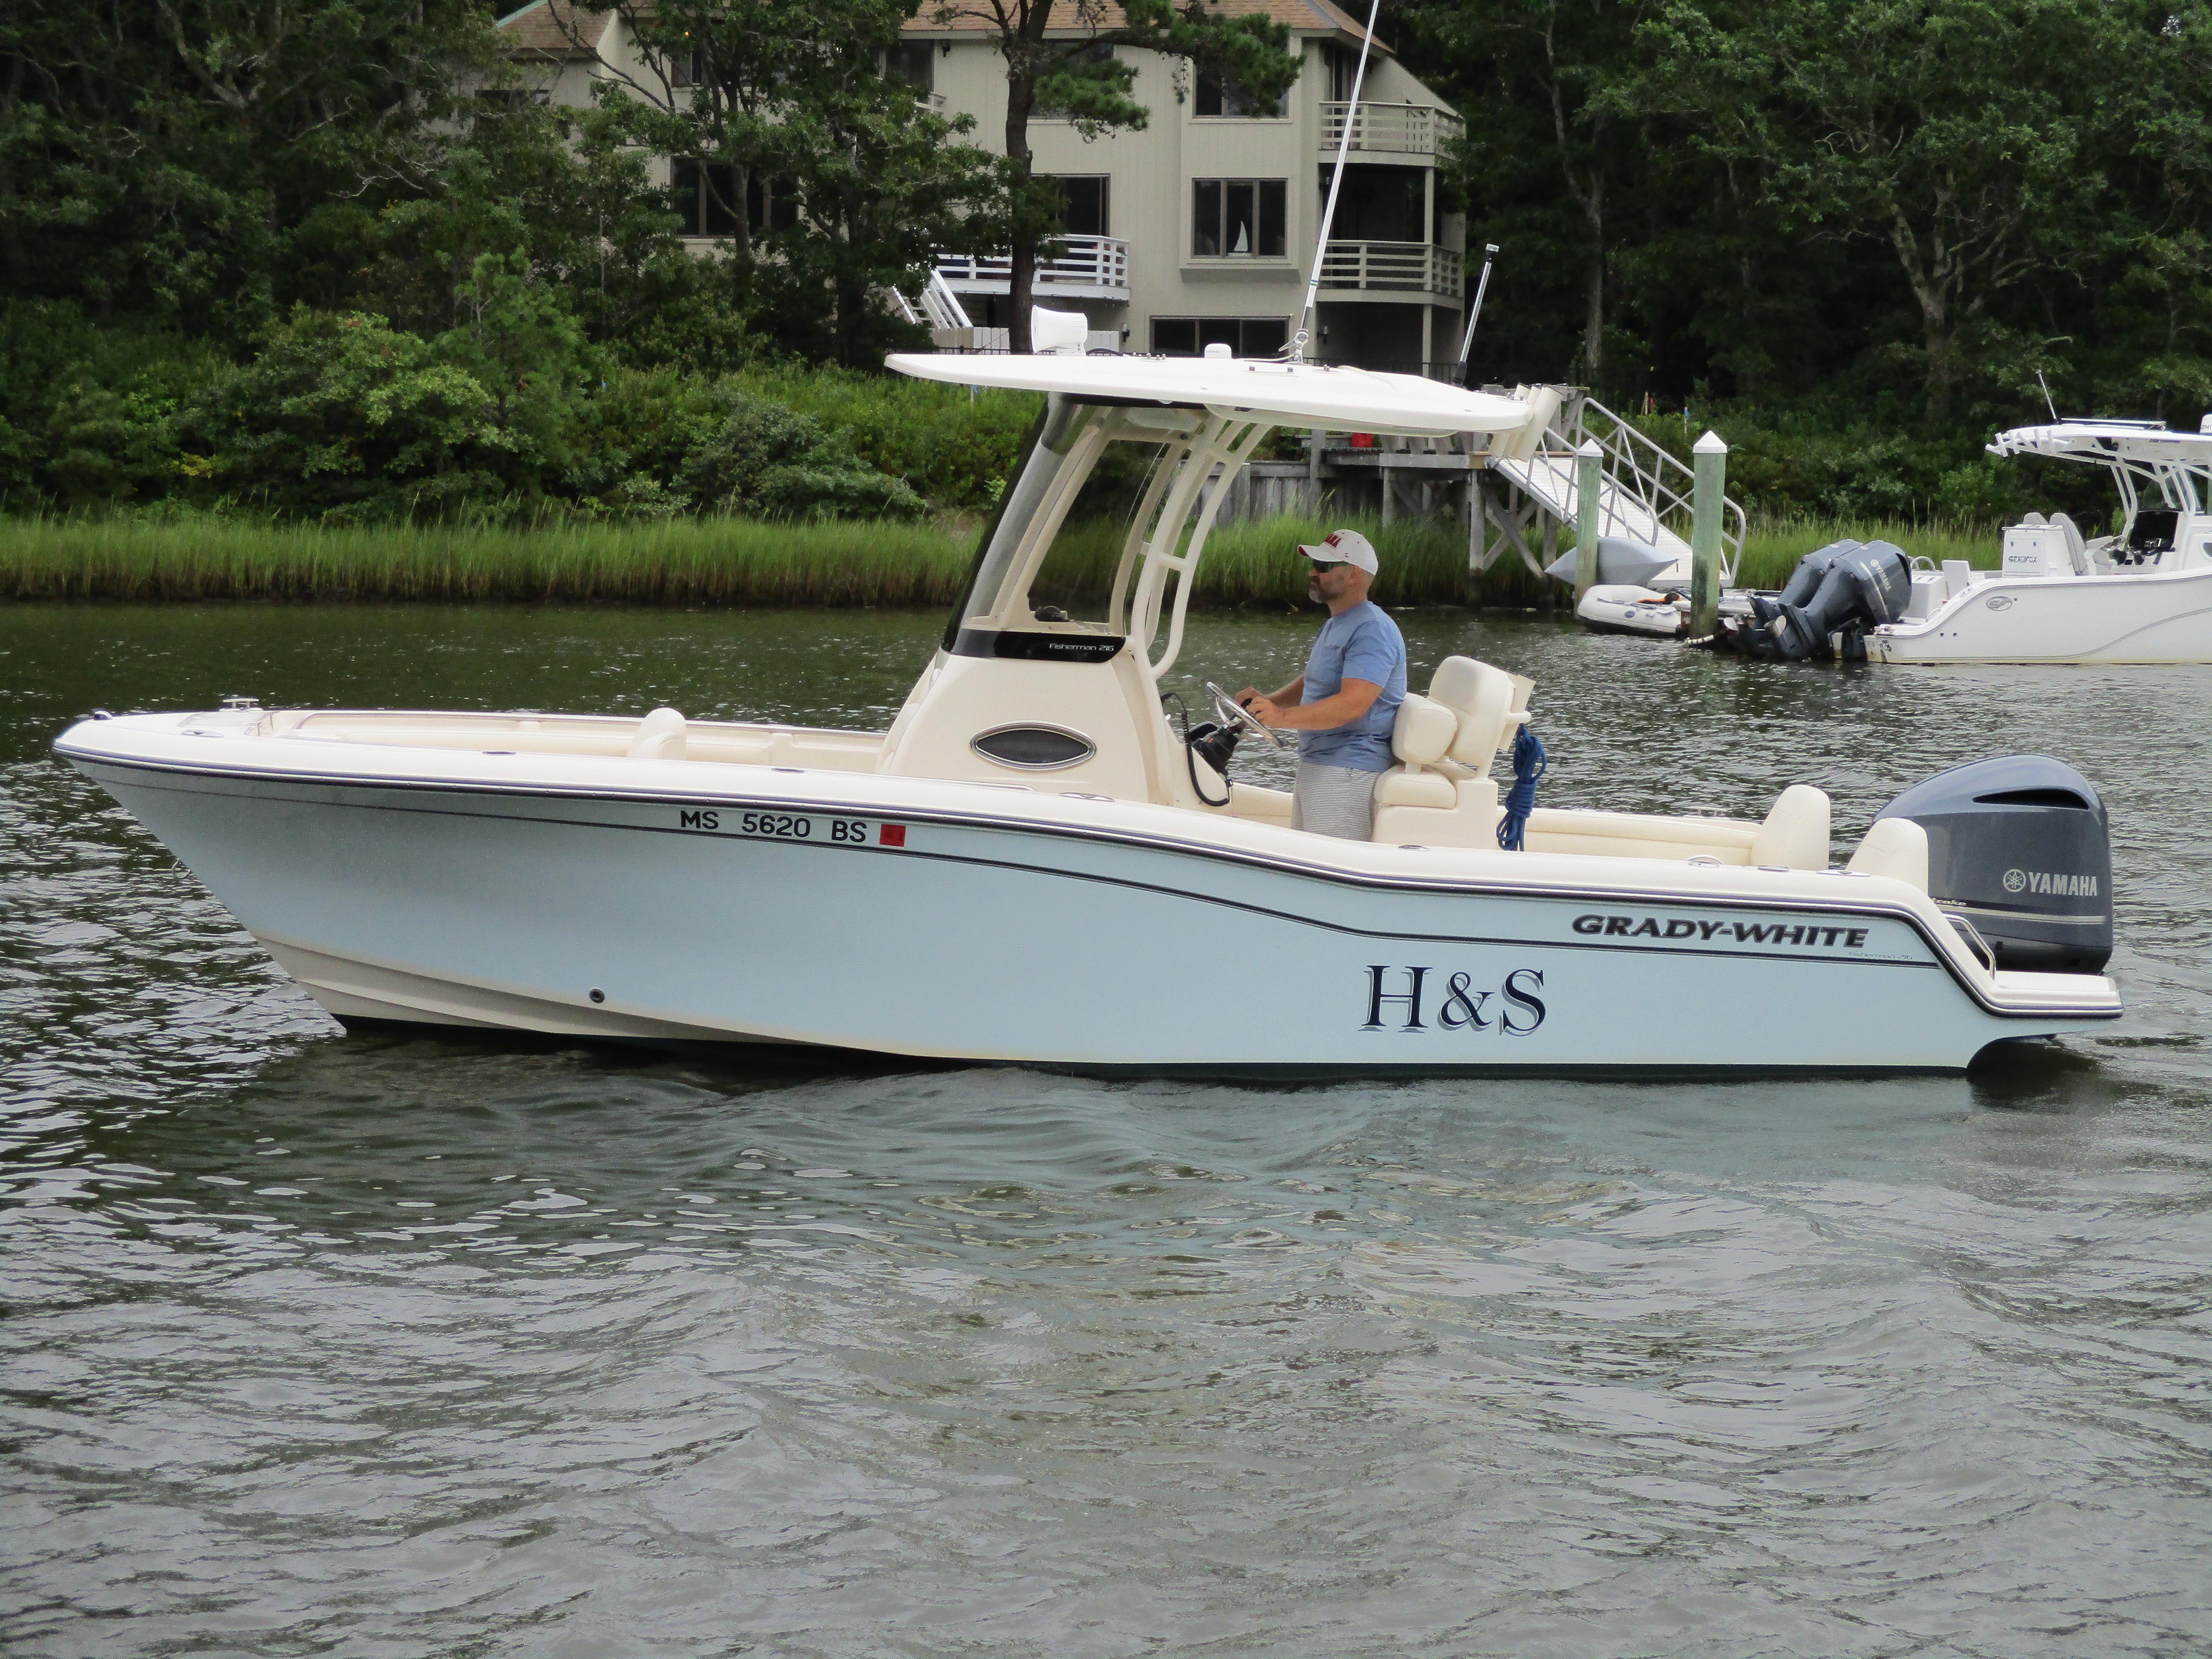 Grady-White Fisherman 216 boats for sale pic image